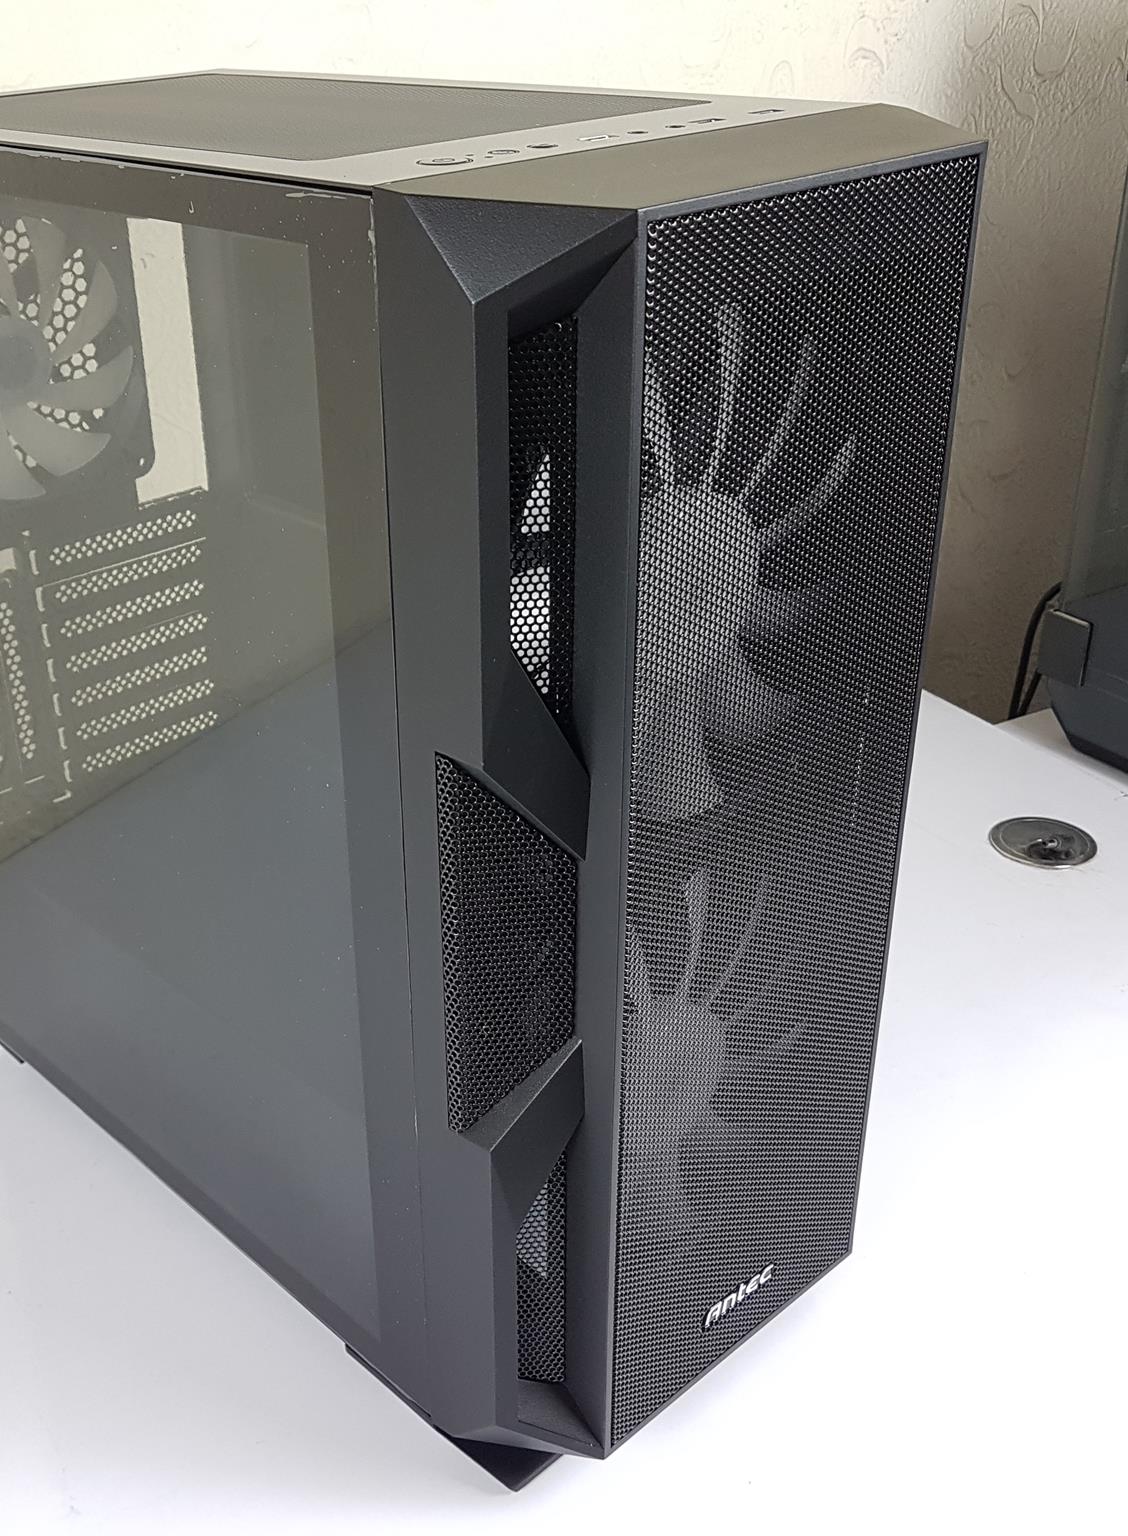 Antec nx800 Closer front side Look 